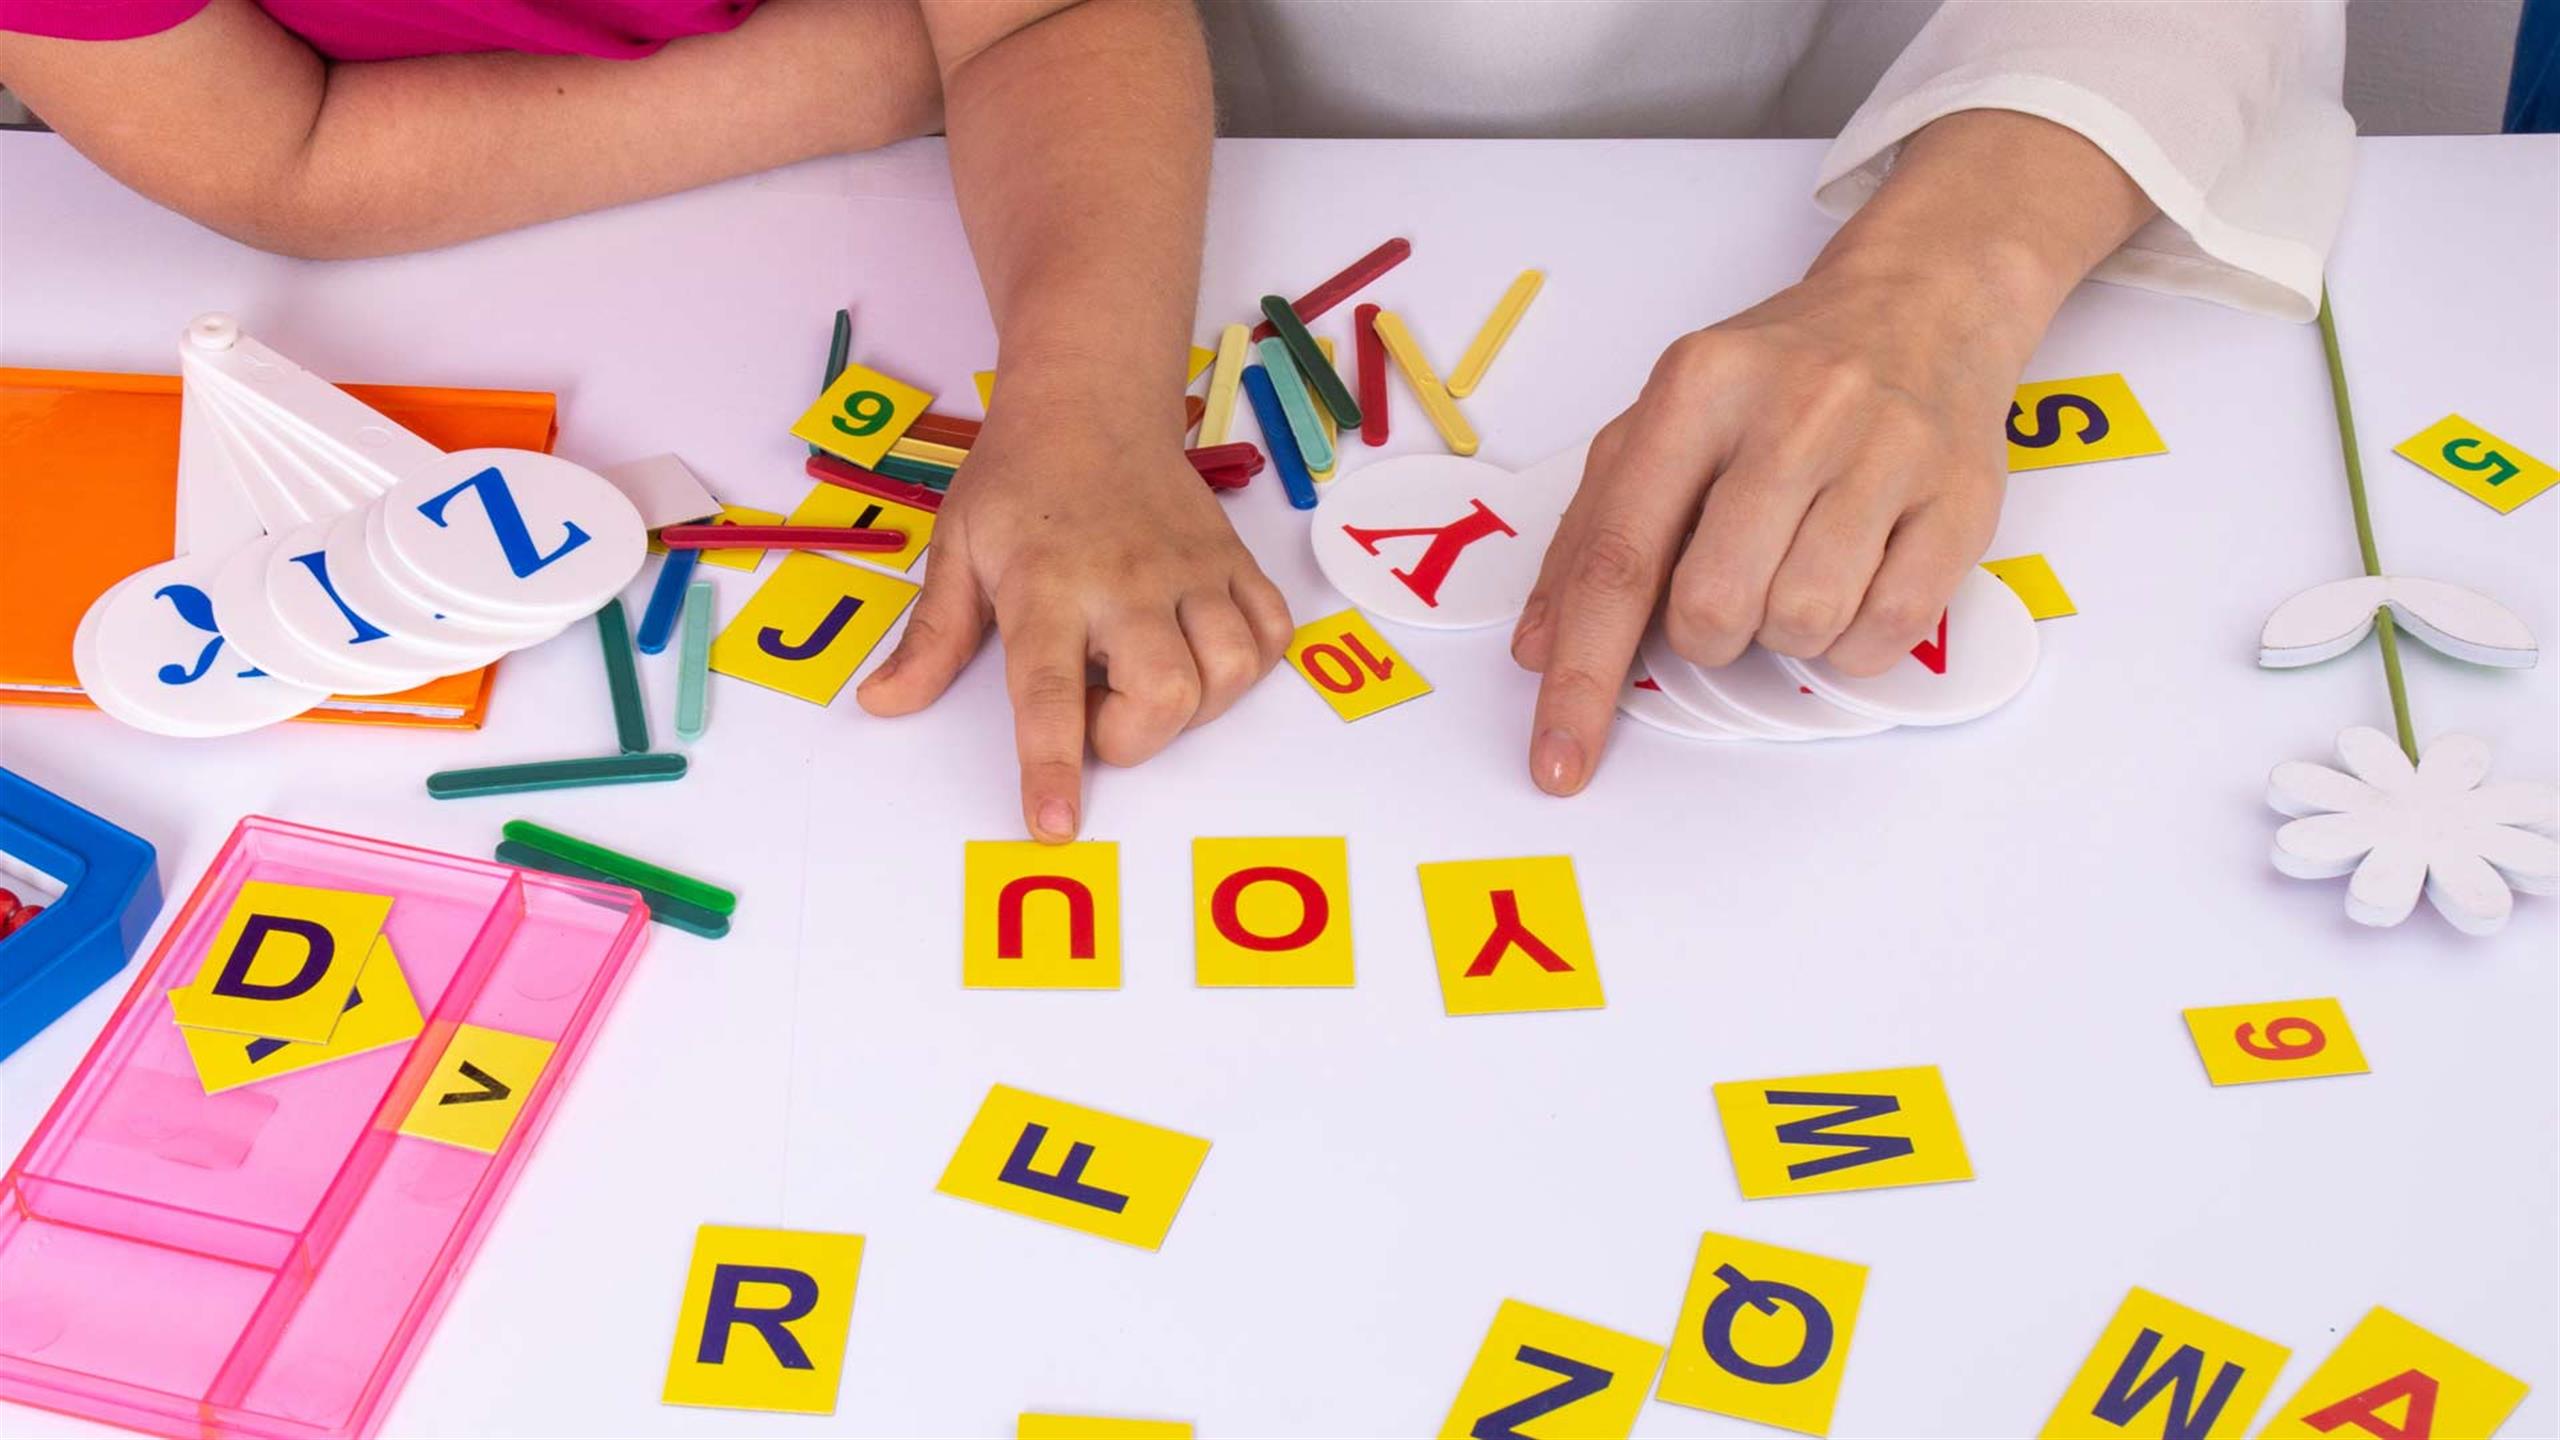 Two hands pointing at some letters at the table.